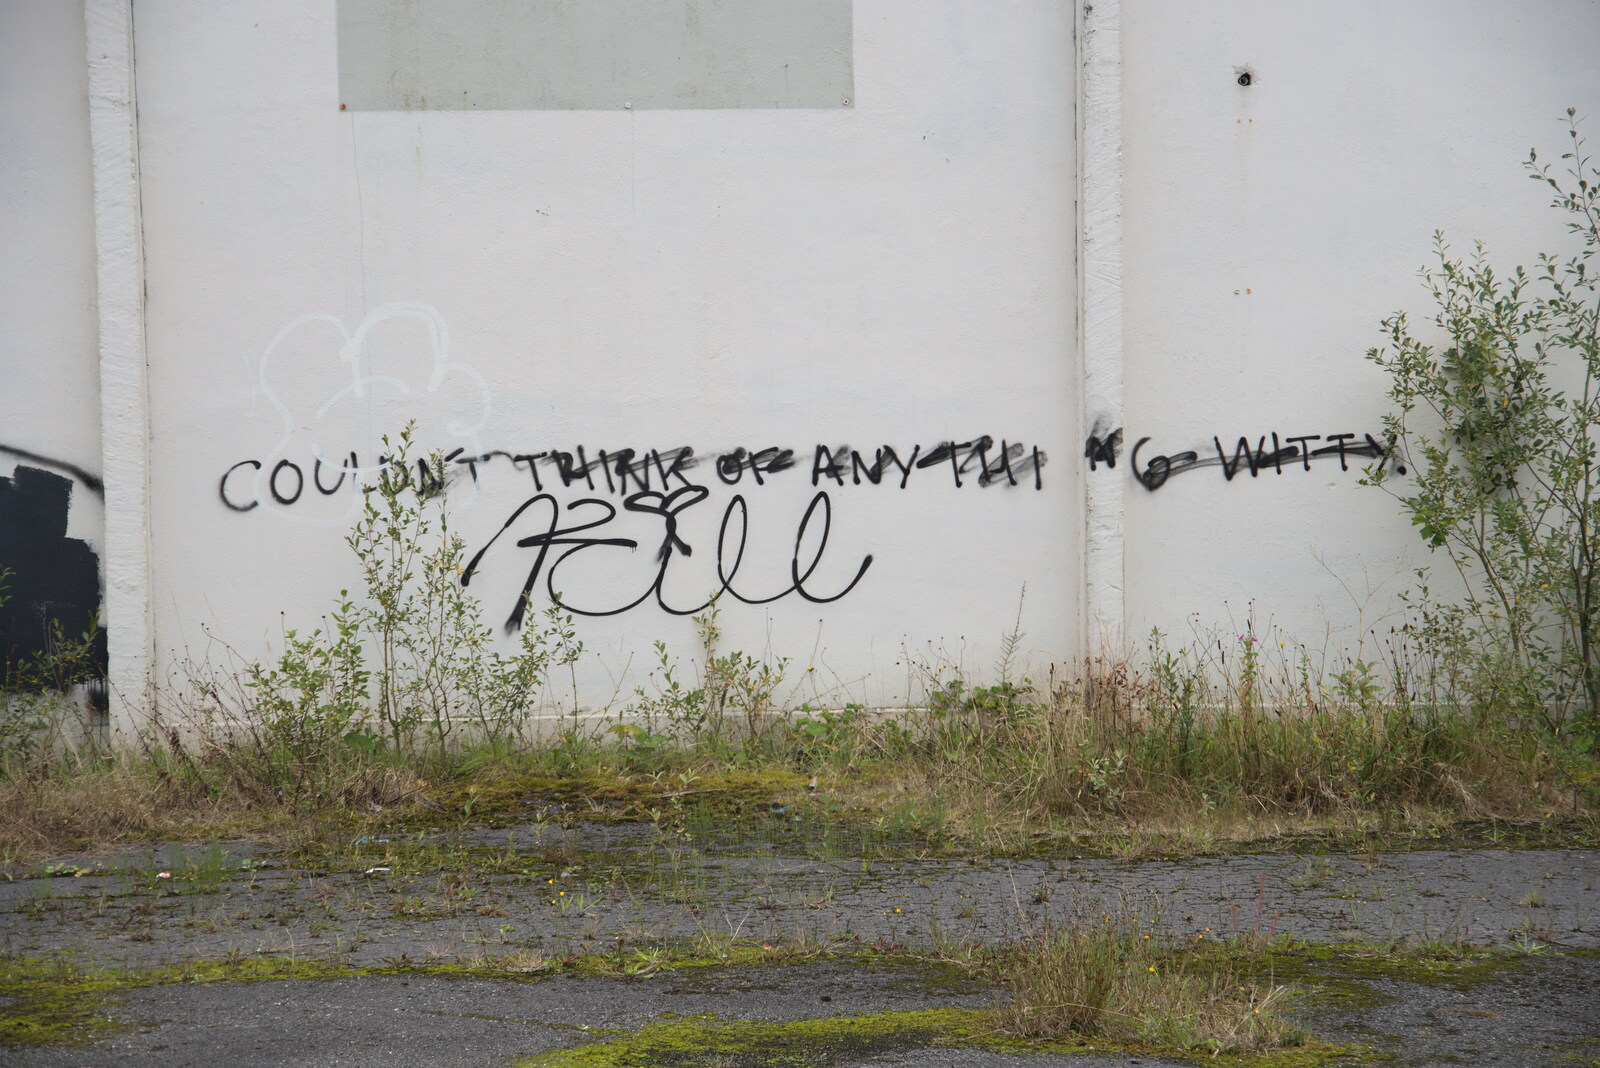 Couldn't think of anything Witty graffiti from Walks Around Benbulben and Carrowmore, County Sligo, Ireland - 13th August 2021